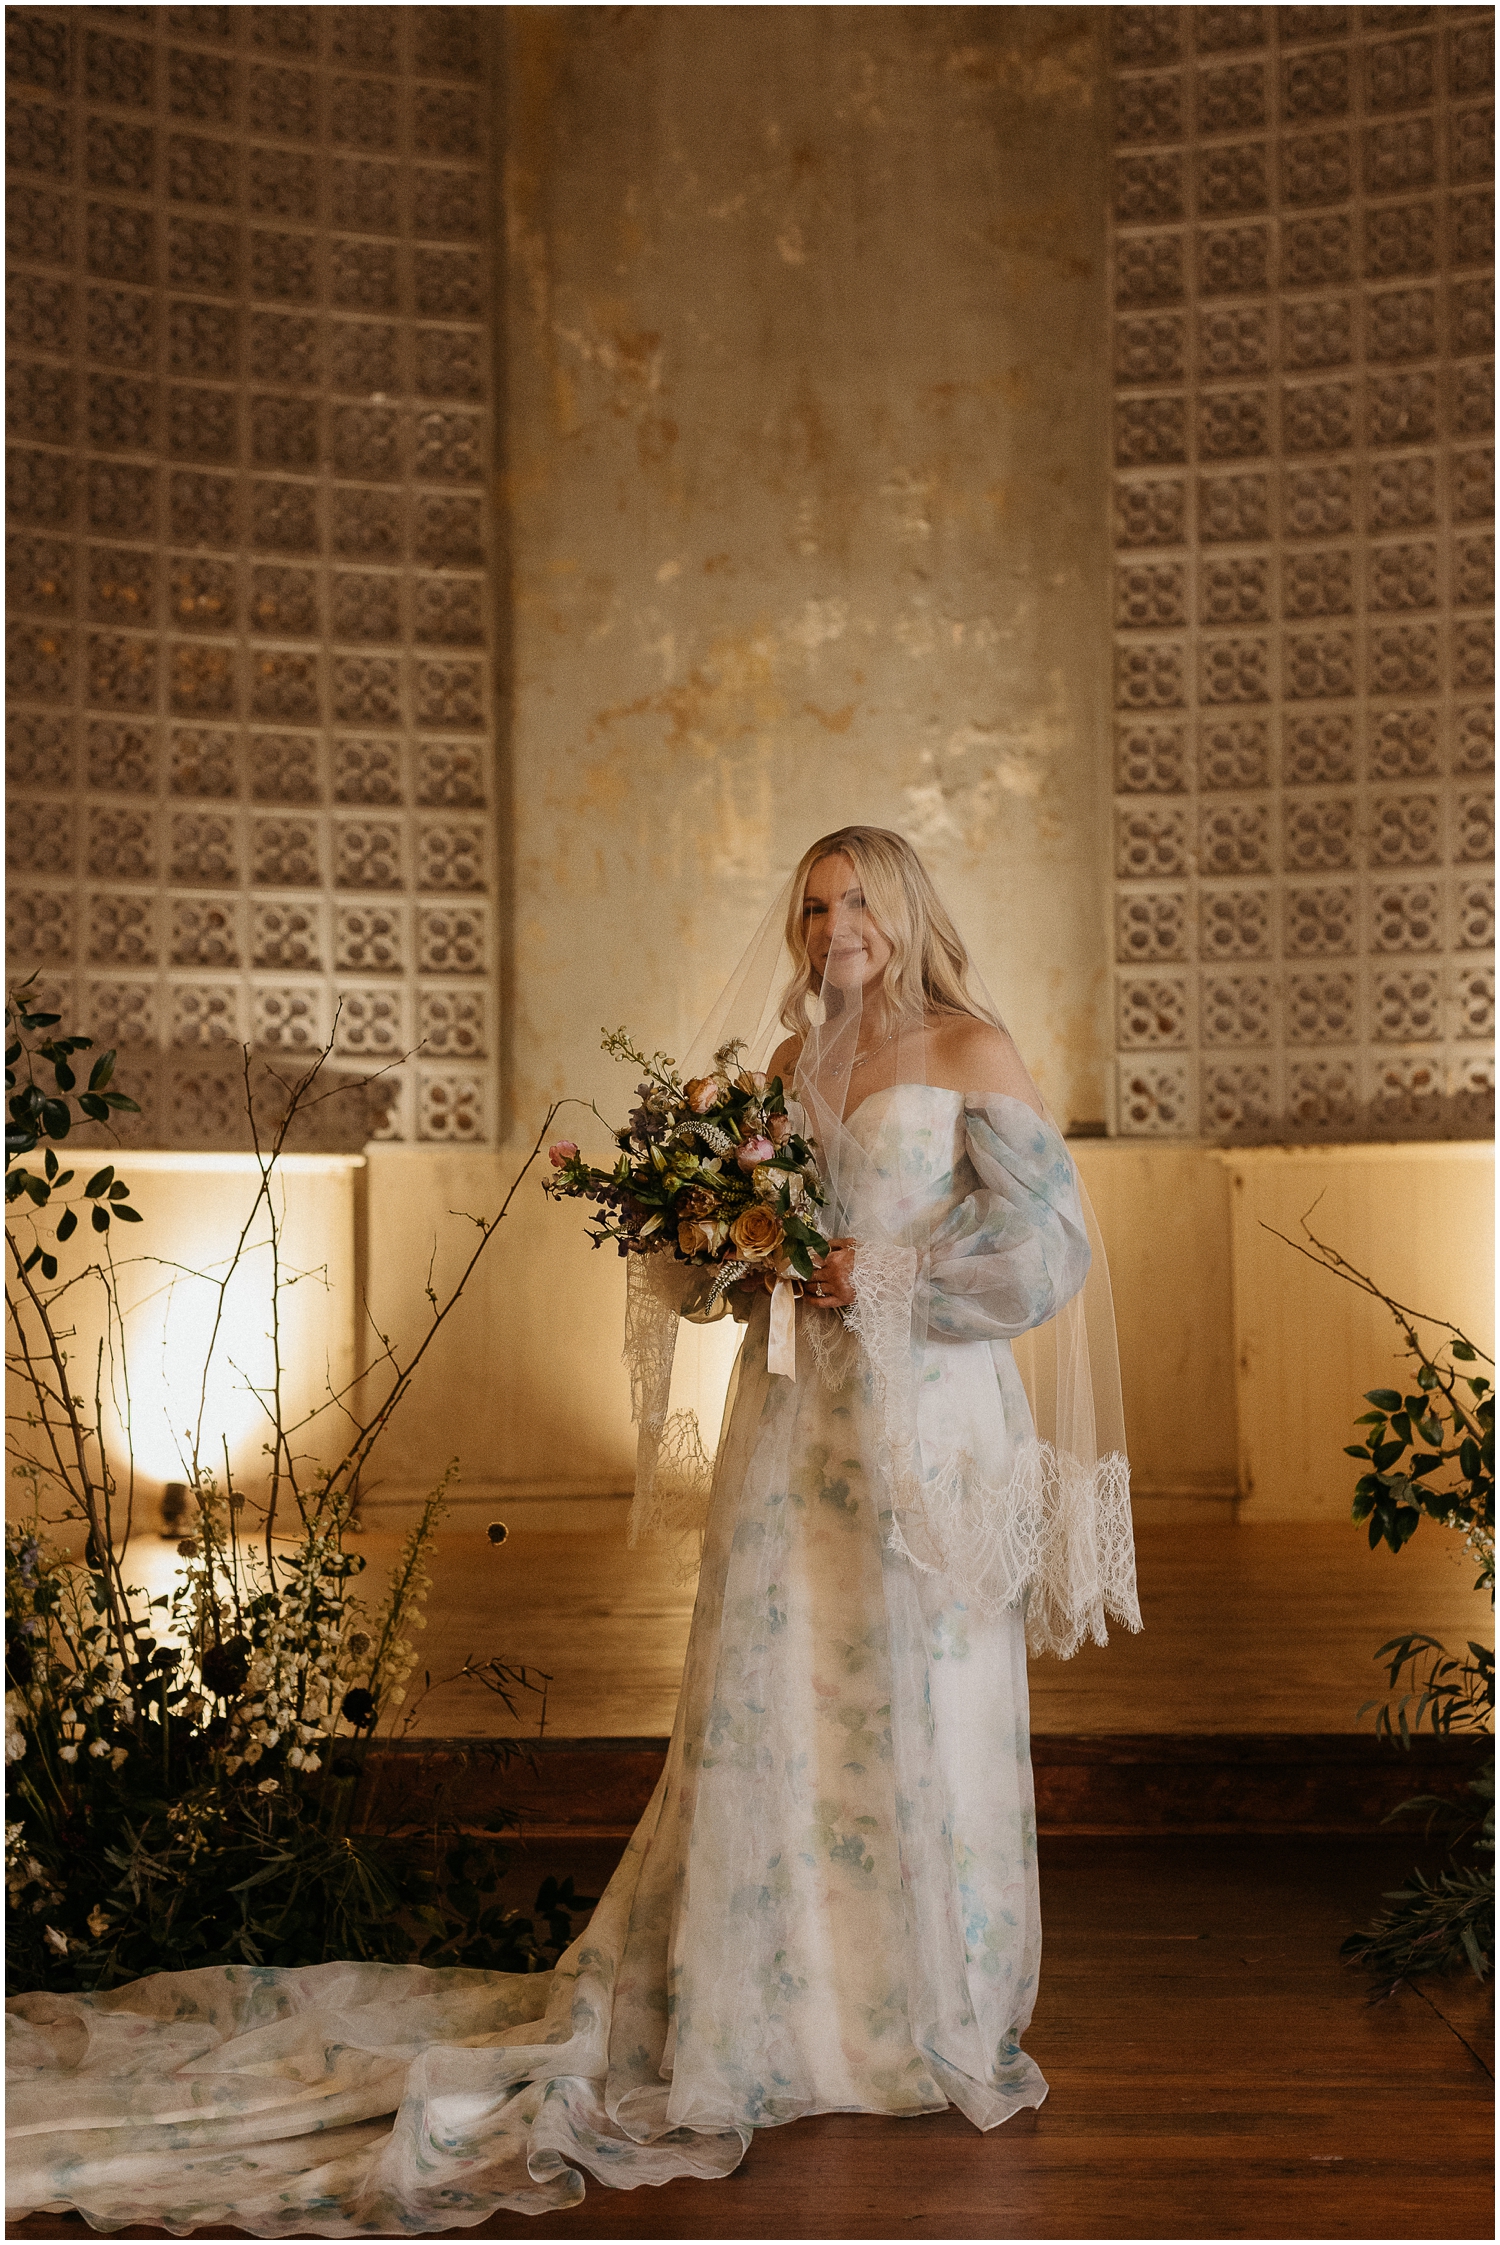 A bride poses with her bridal bouquet in Hotel Peter and Paul for editorial wedding photography.